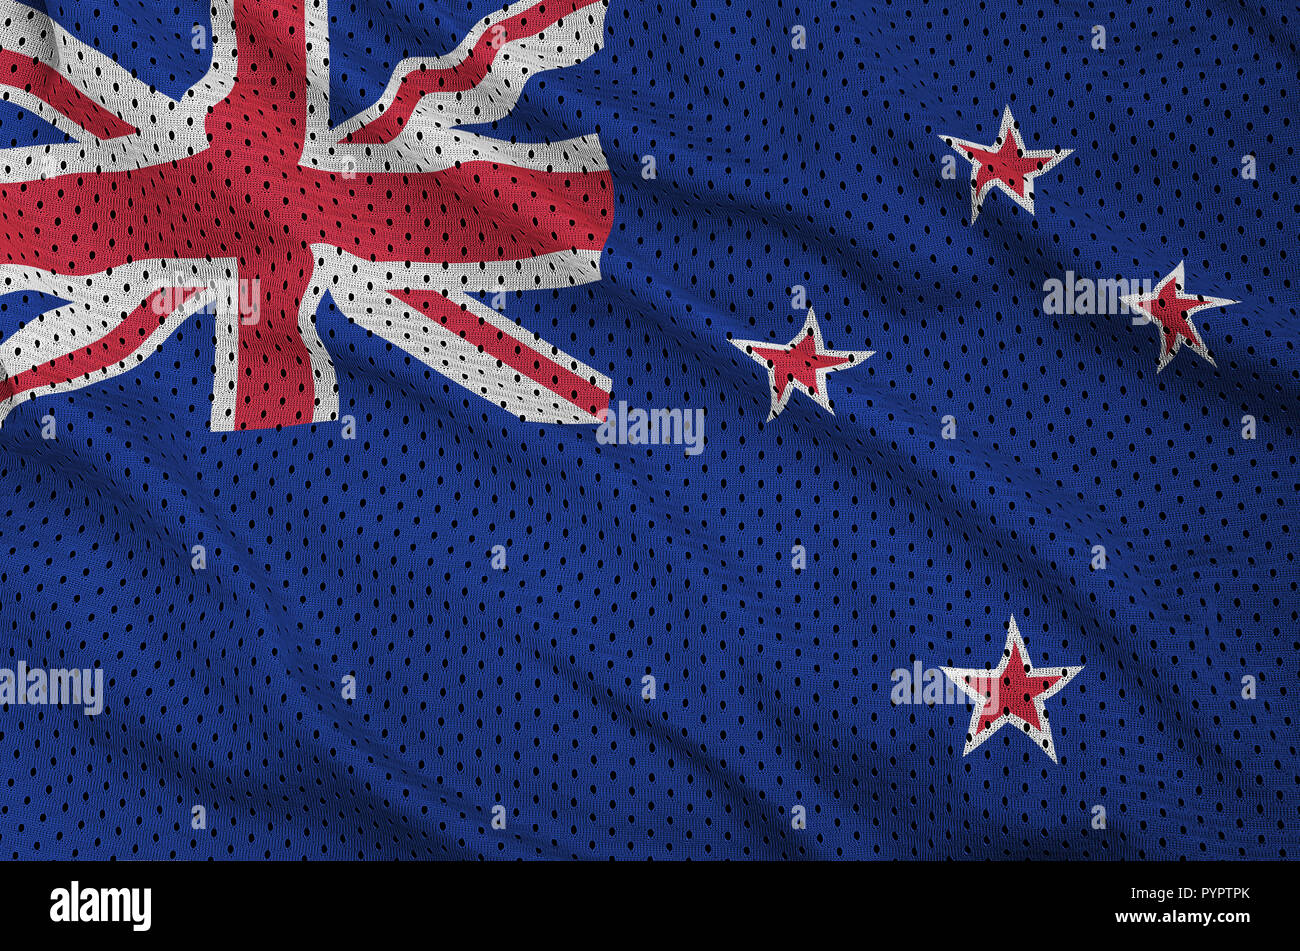 New Zealand flag printed on a polyester nylon sportswear mesh fabric with some folds Stock Photo